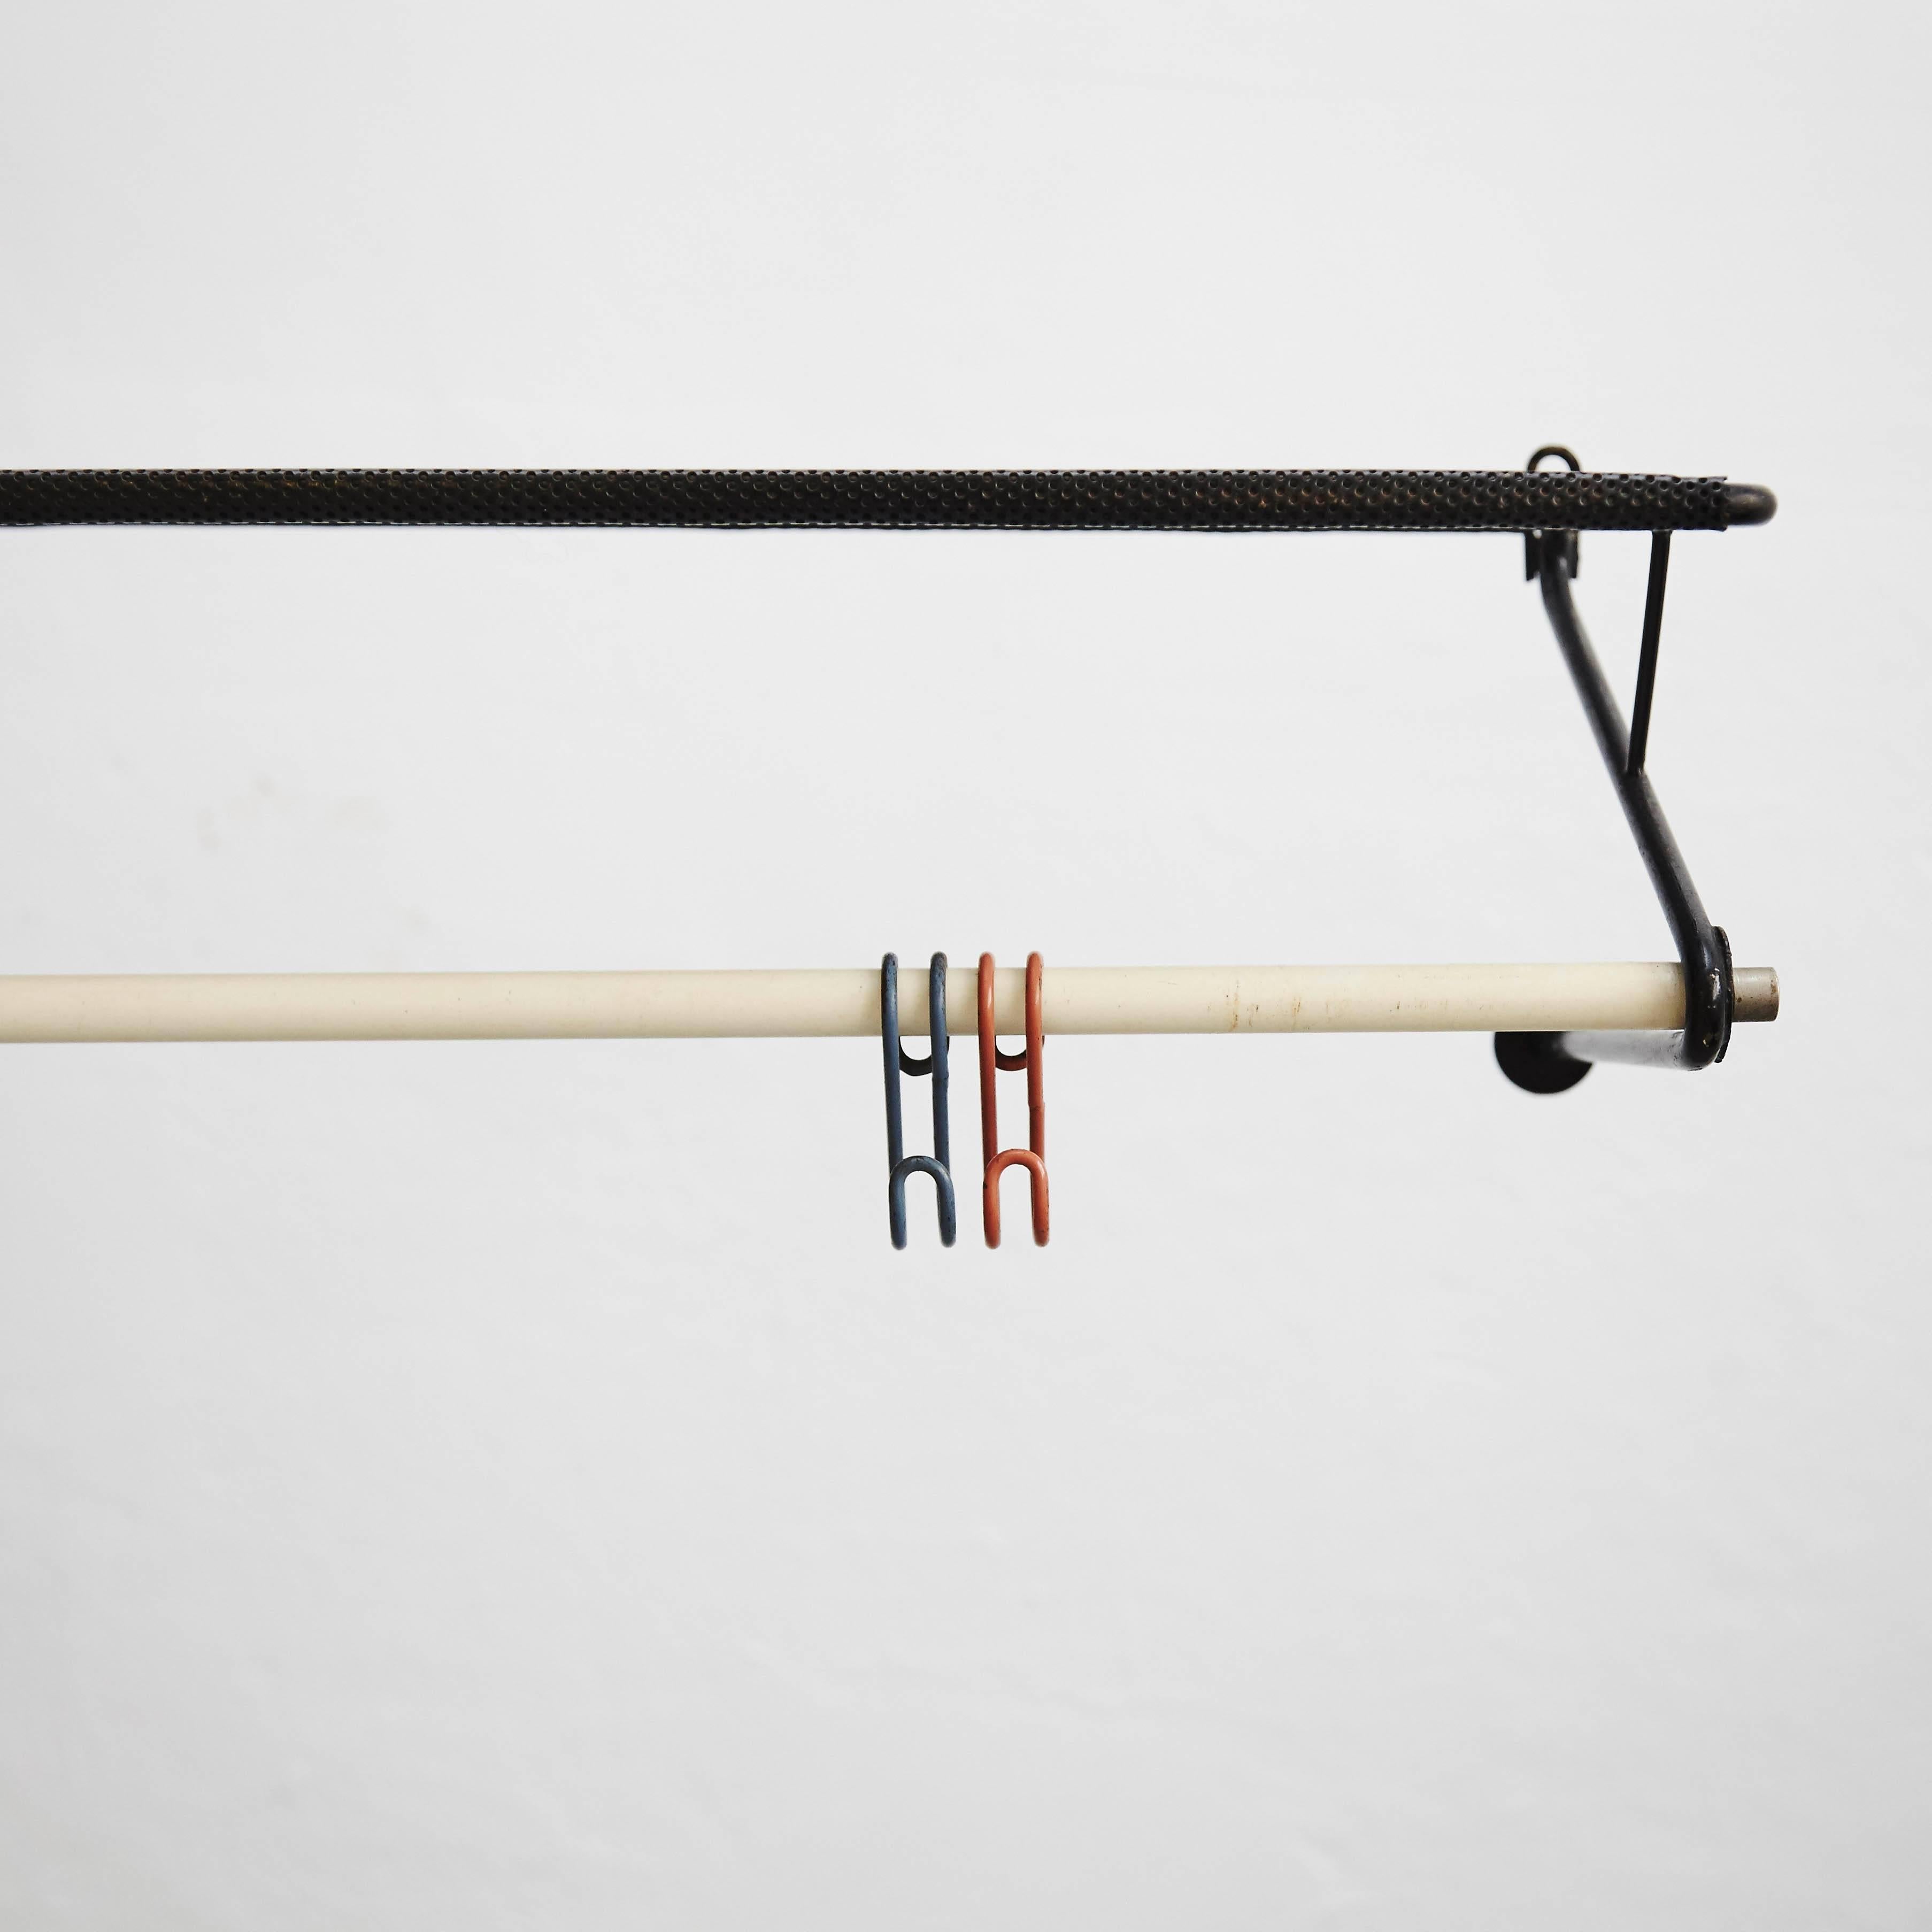 Coat rack designed by Mathieu Matégot.
Manufactured by Artimeta (Netherland), circa 1950.
Perforated and lacquered metal.

In good original condition, with minor wear consistent with age and use, preserving a beautiful patina.

Mathieu